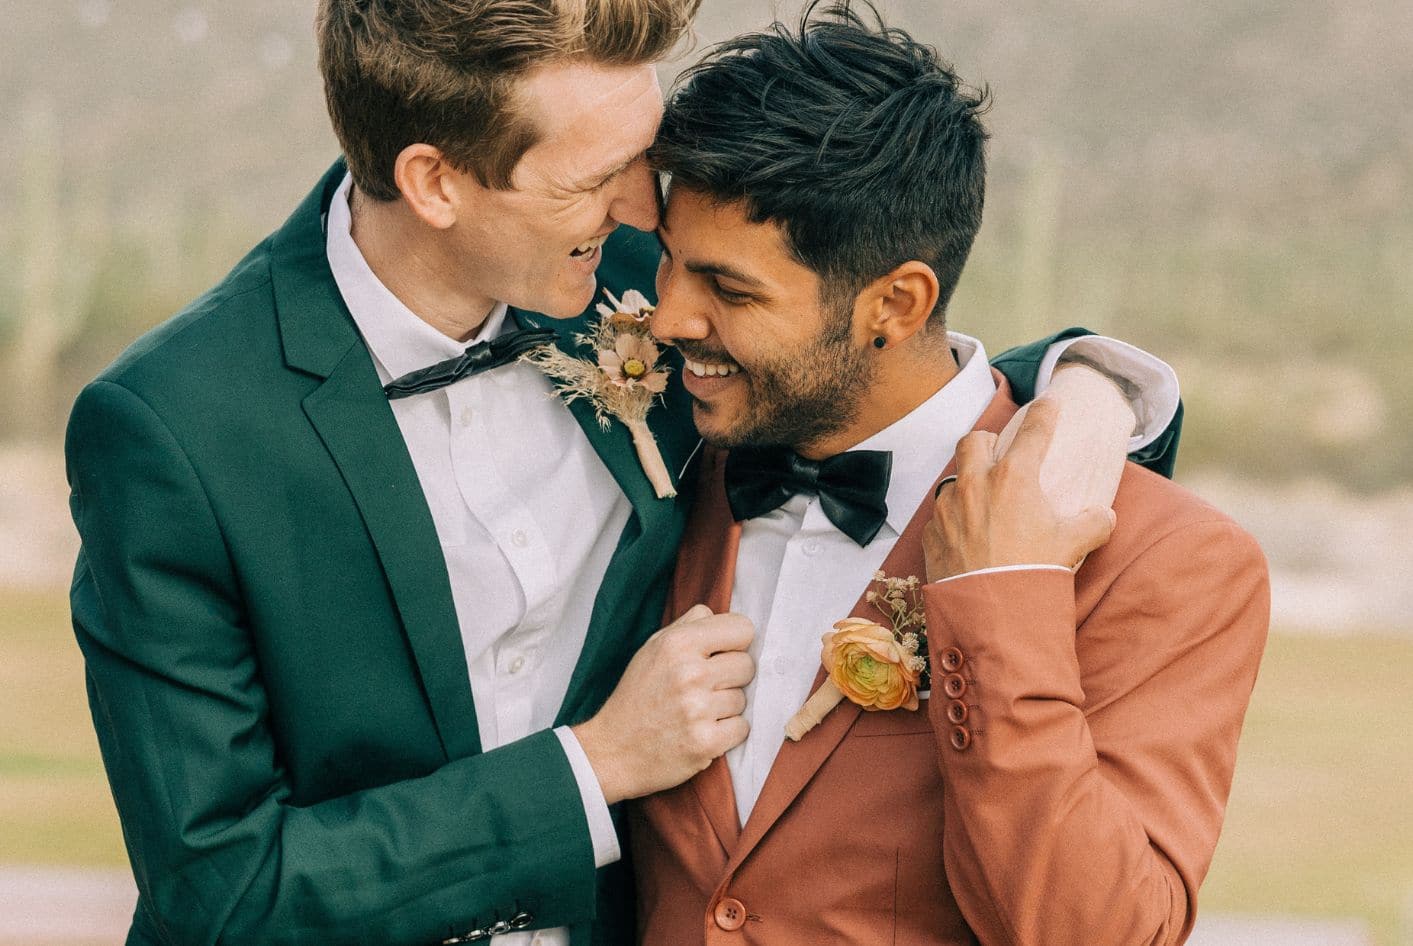 Embracing Every Love Story: LGBTQ+ Weddings at CJ’s Off the Square